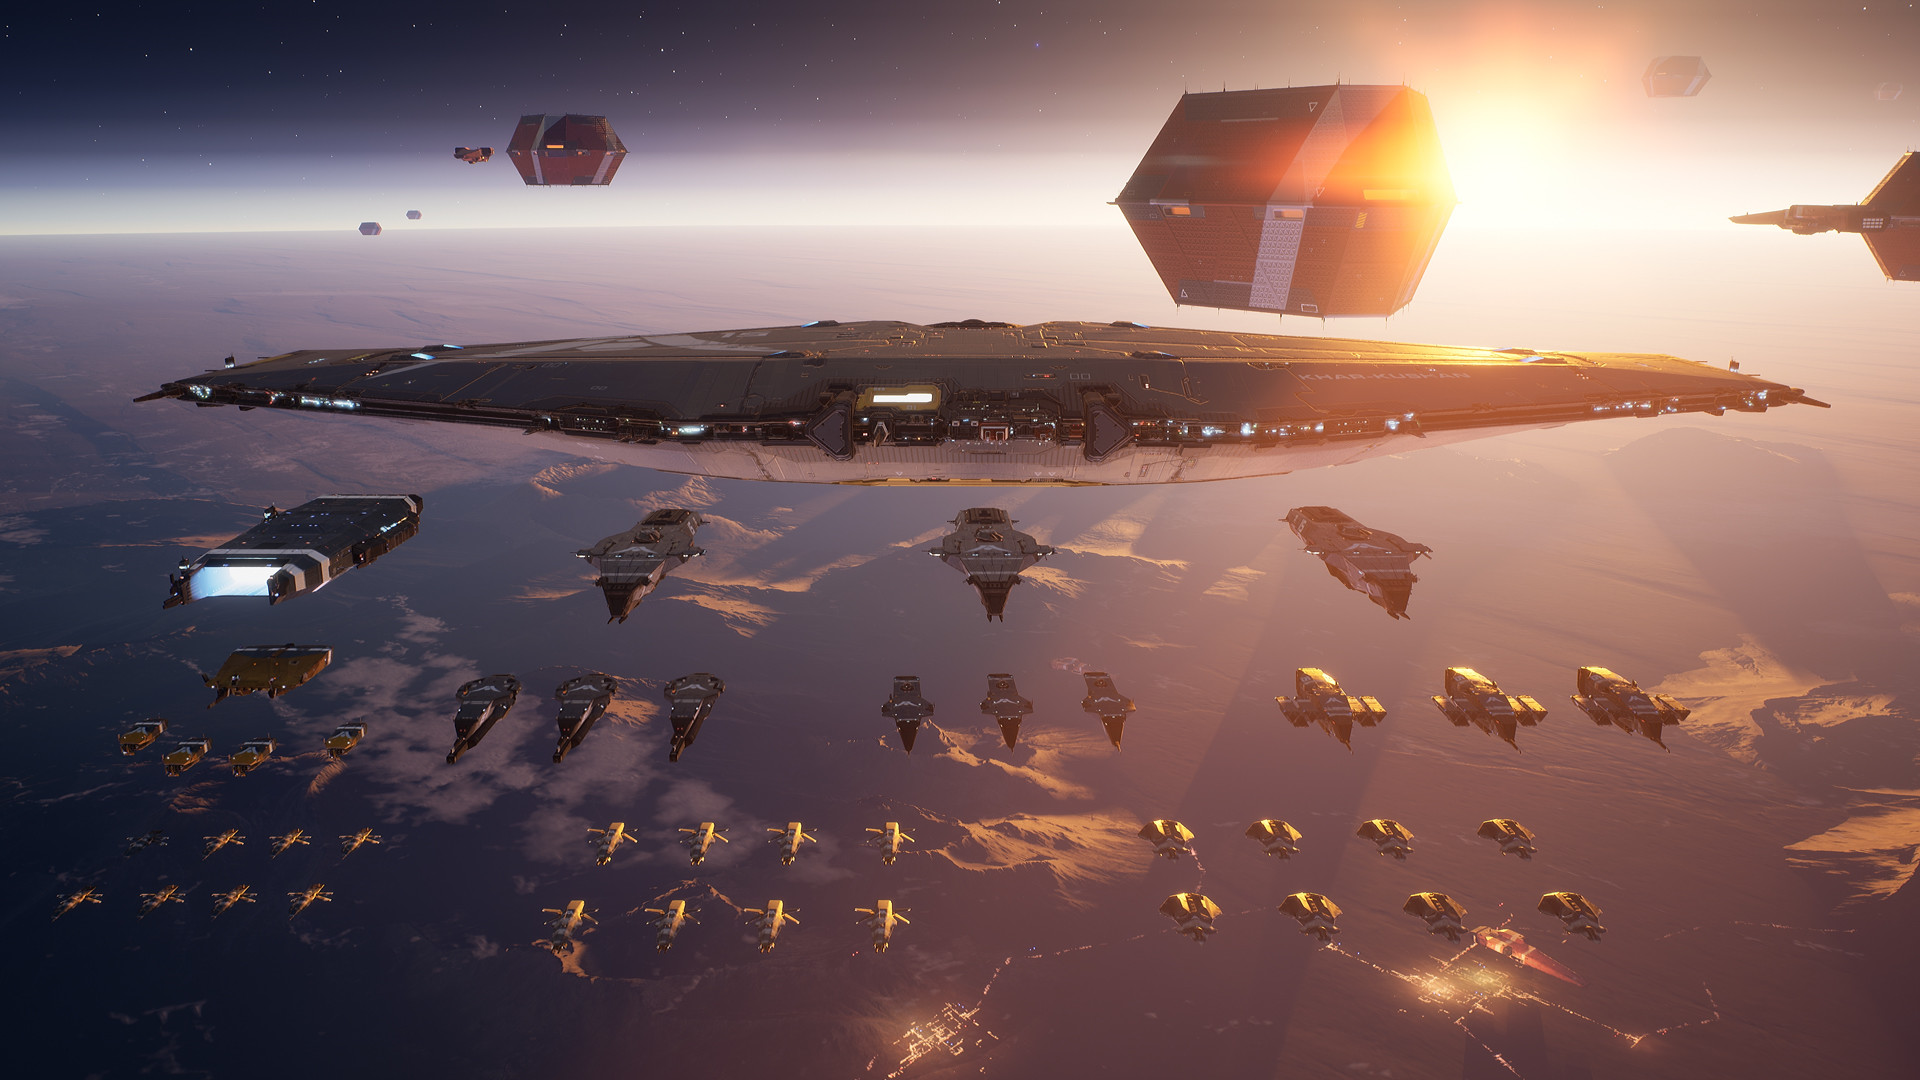 Gearbox Publishing and developer Blackbird Interactive have announced the Homeworld 3 launches in Q4 2022 for PC.